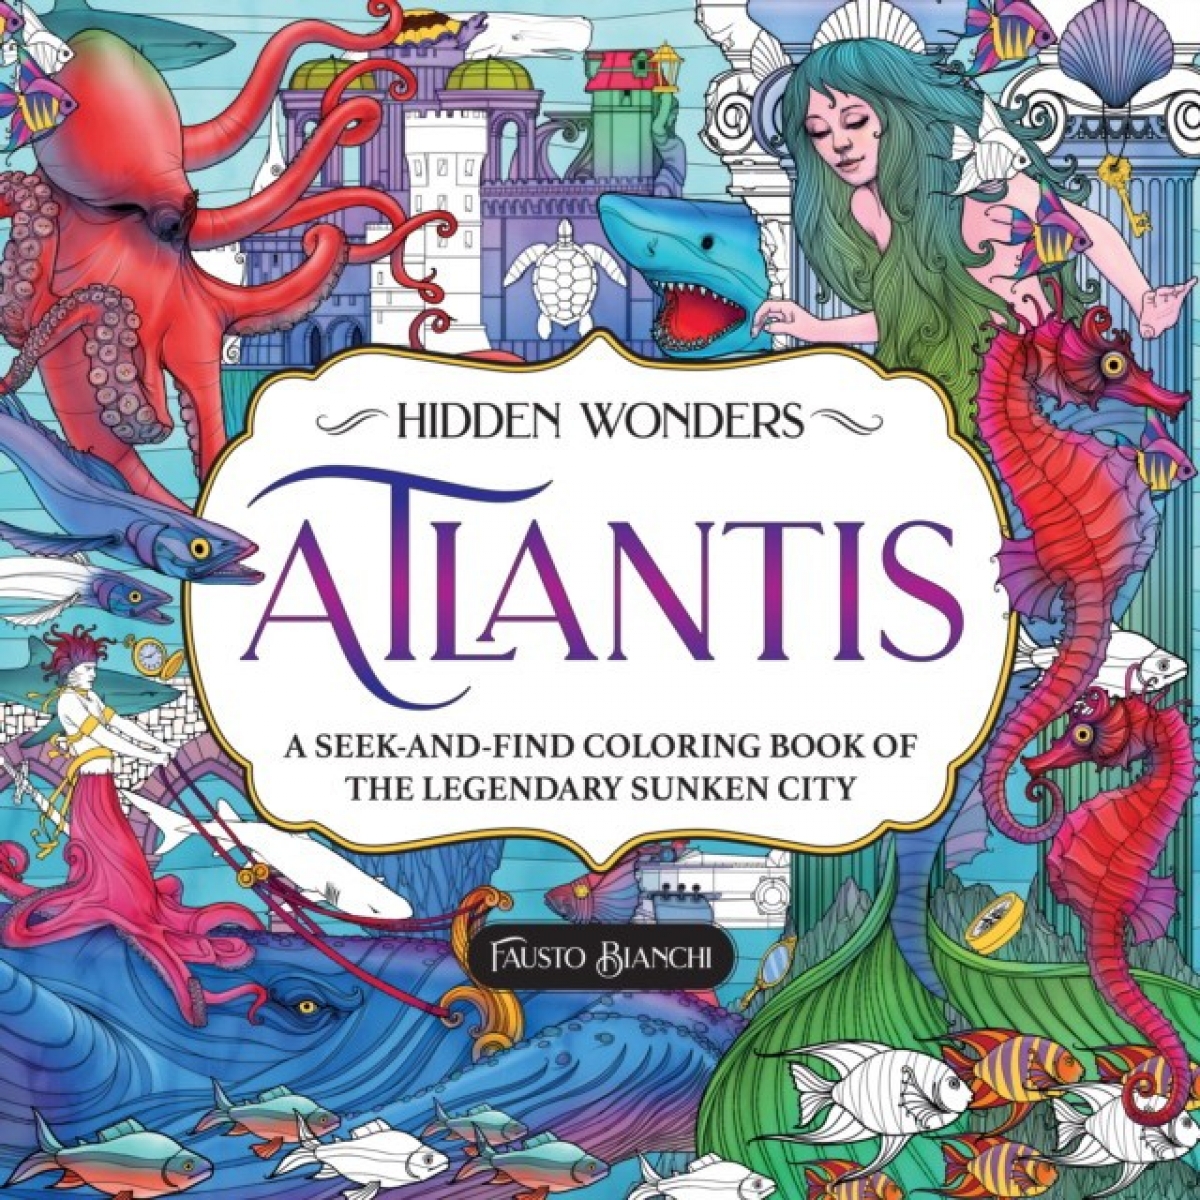 Bianchi Fausto Hidden Wonders: Atlantis: A Seek-And-Find Coloring Book of the Legendary Sunken City 